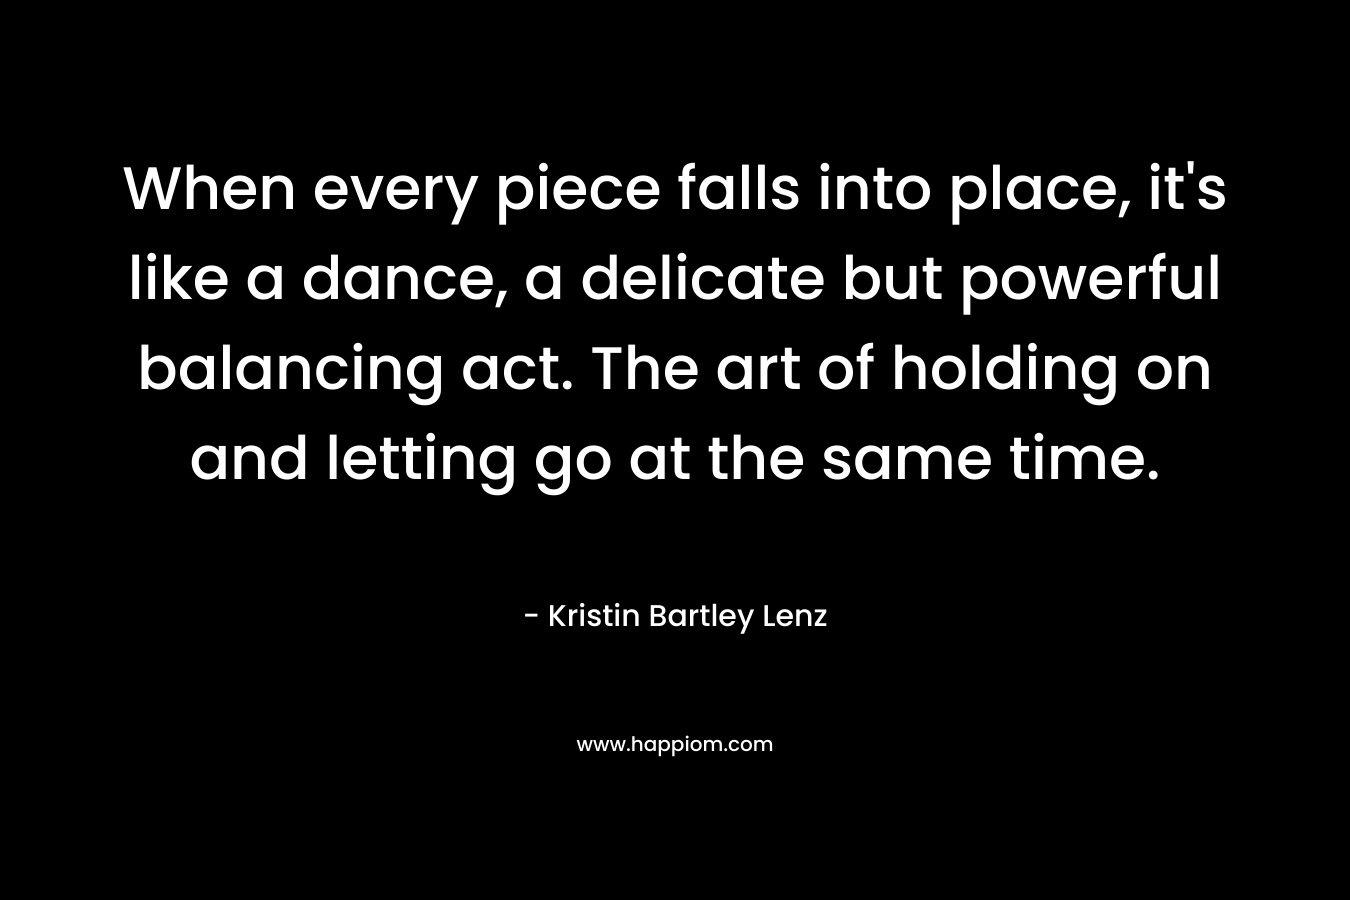 When every piece falls into place, it's like a dance, a delicate but powerful balancing act. The art of holding on and letting go at the same time.